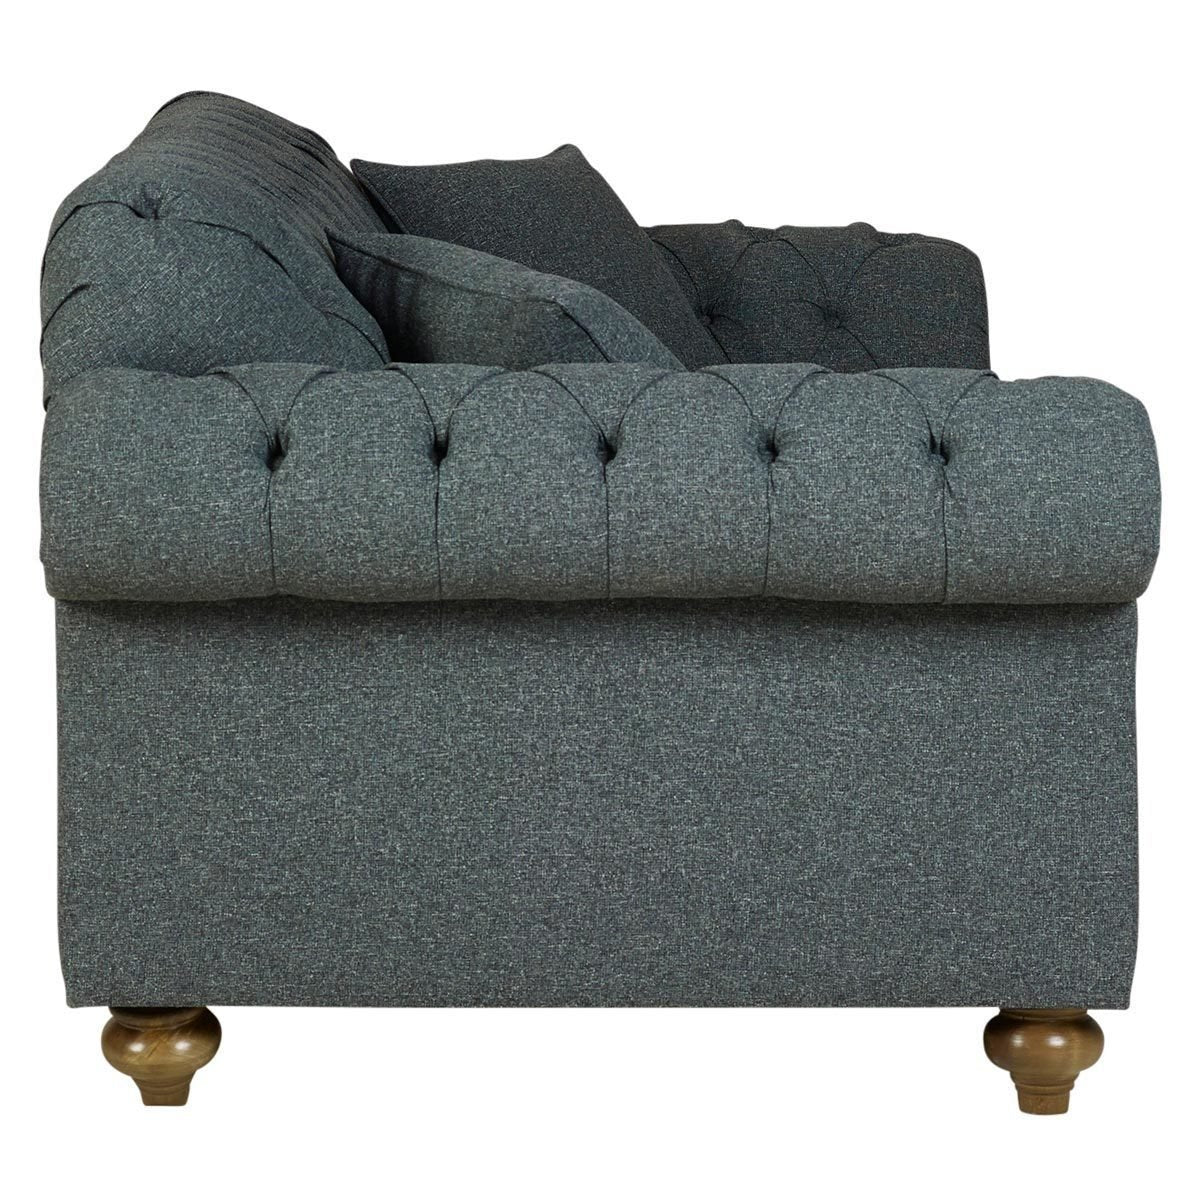 Bordeaux Button Back 2 Seater Fabric Sofa, Grey - Signature Retail Stores